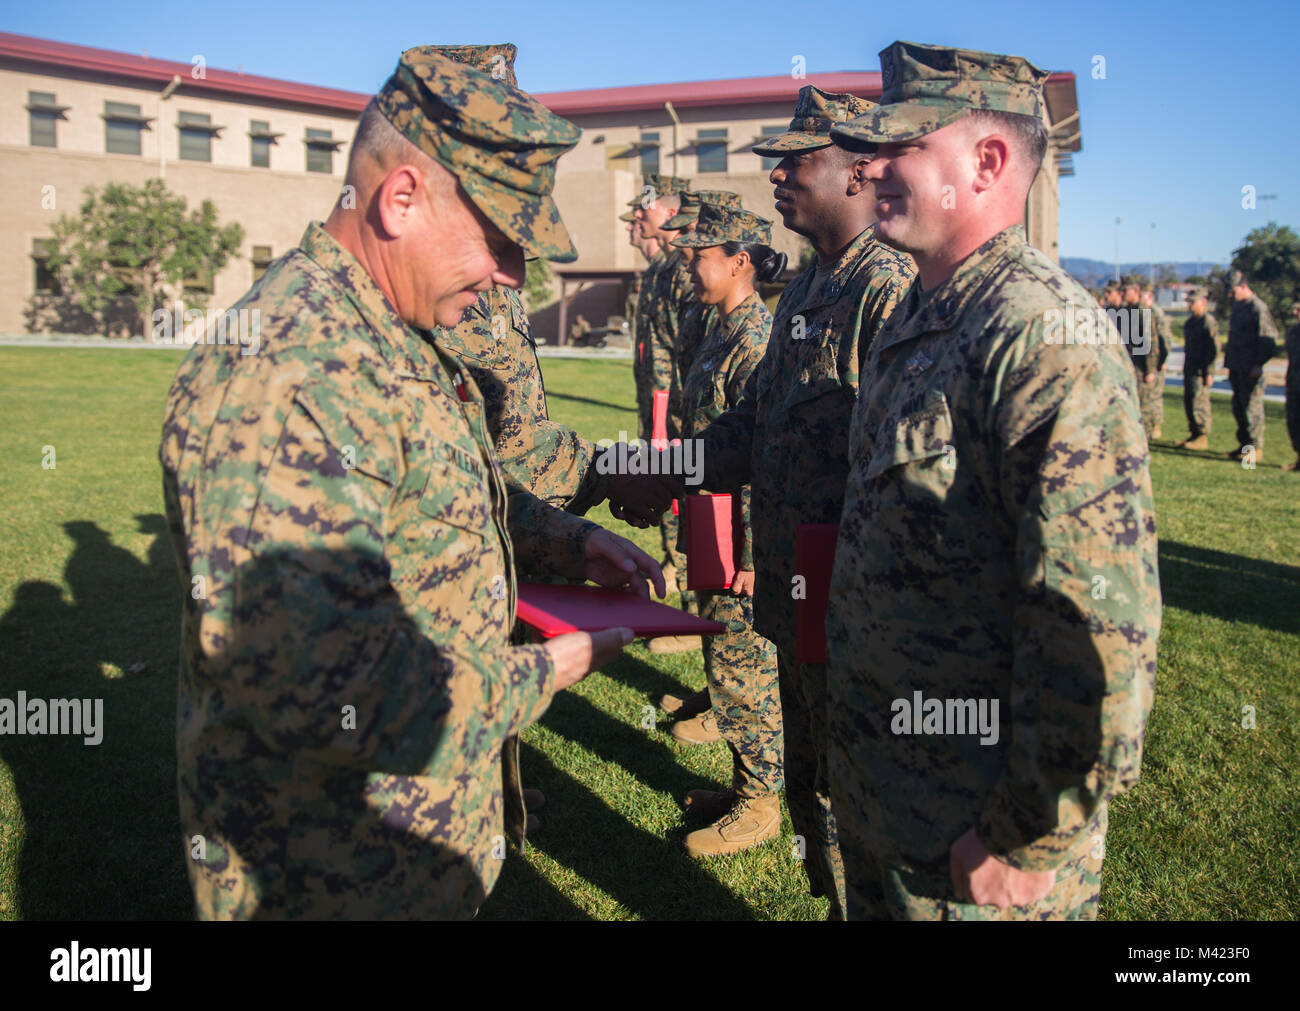 U.S. Navy Petty Officer 1st Class Philip Lopez, a hospital corpsman with 1st Medical Battalion, 1st Marine Logistics Group, is awarded the Senior Sailor of the Quarter award by U.S. Marine Brig. Gen Stephen Sklenka, the commanding general for the 1st MLG, during a quarterly awards ceremony at Camp Pendleton, Calif., Feb. 8, 2018. The awards ceremony is conducted every quarter to highlight the achievements of the Marines and Sailors throughout the unit. (U.S. Marine Corps photo by Cpl. Adam Dublinske) Stock Photo